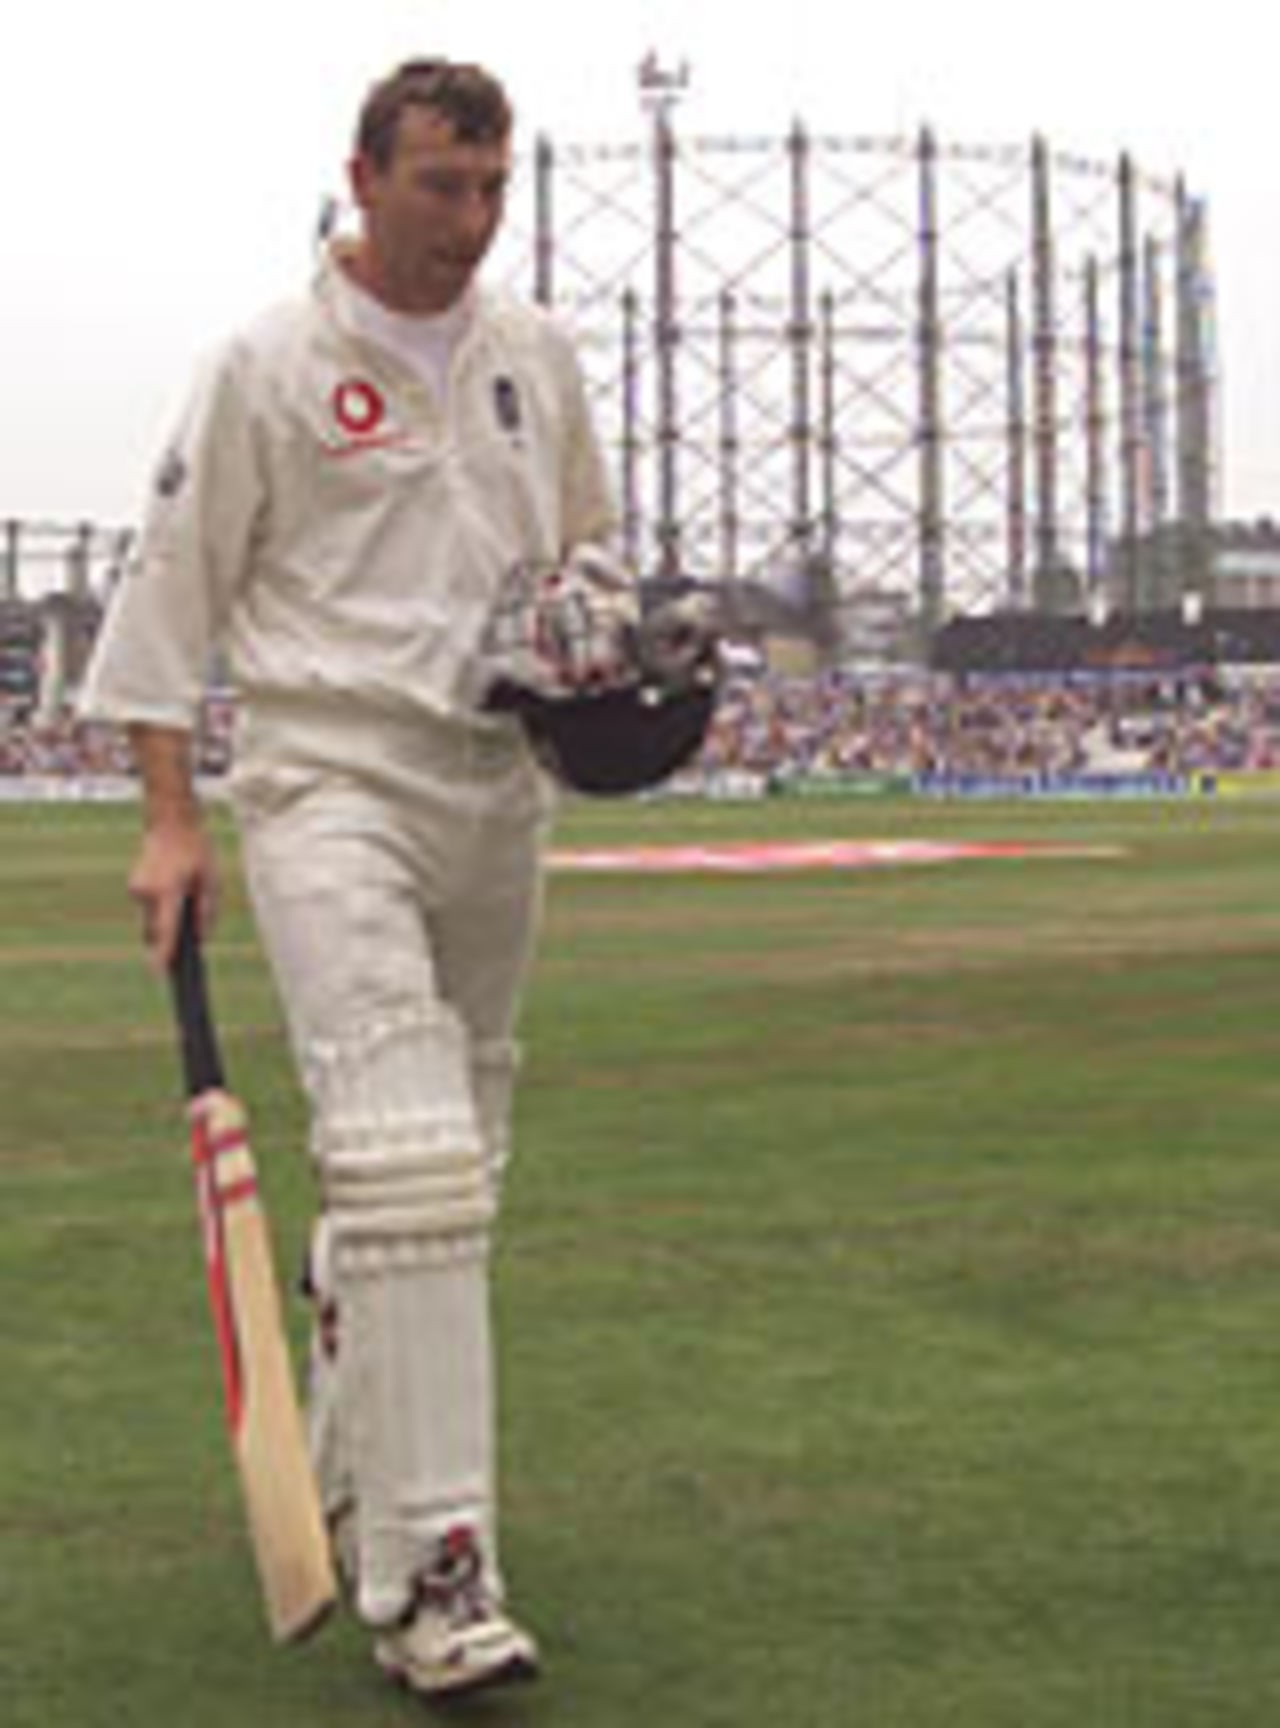 Michael Atherton walks off after playing his last Test innings, August 27, 2001